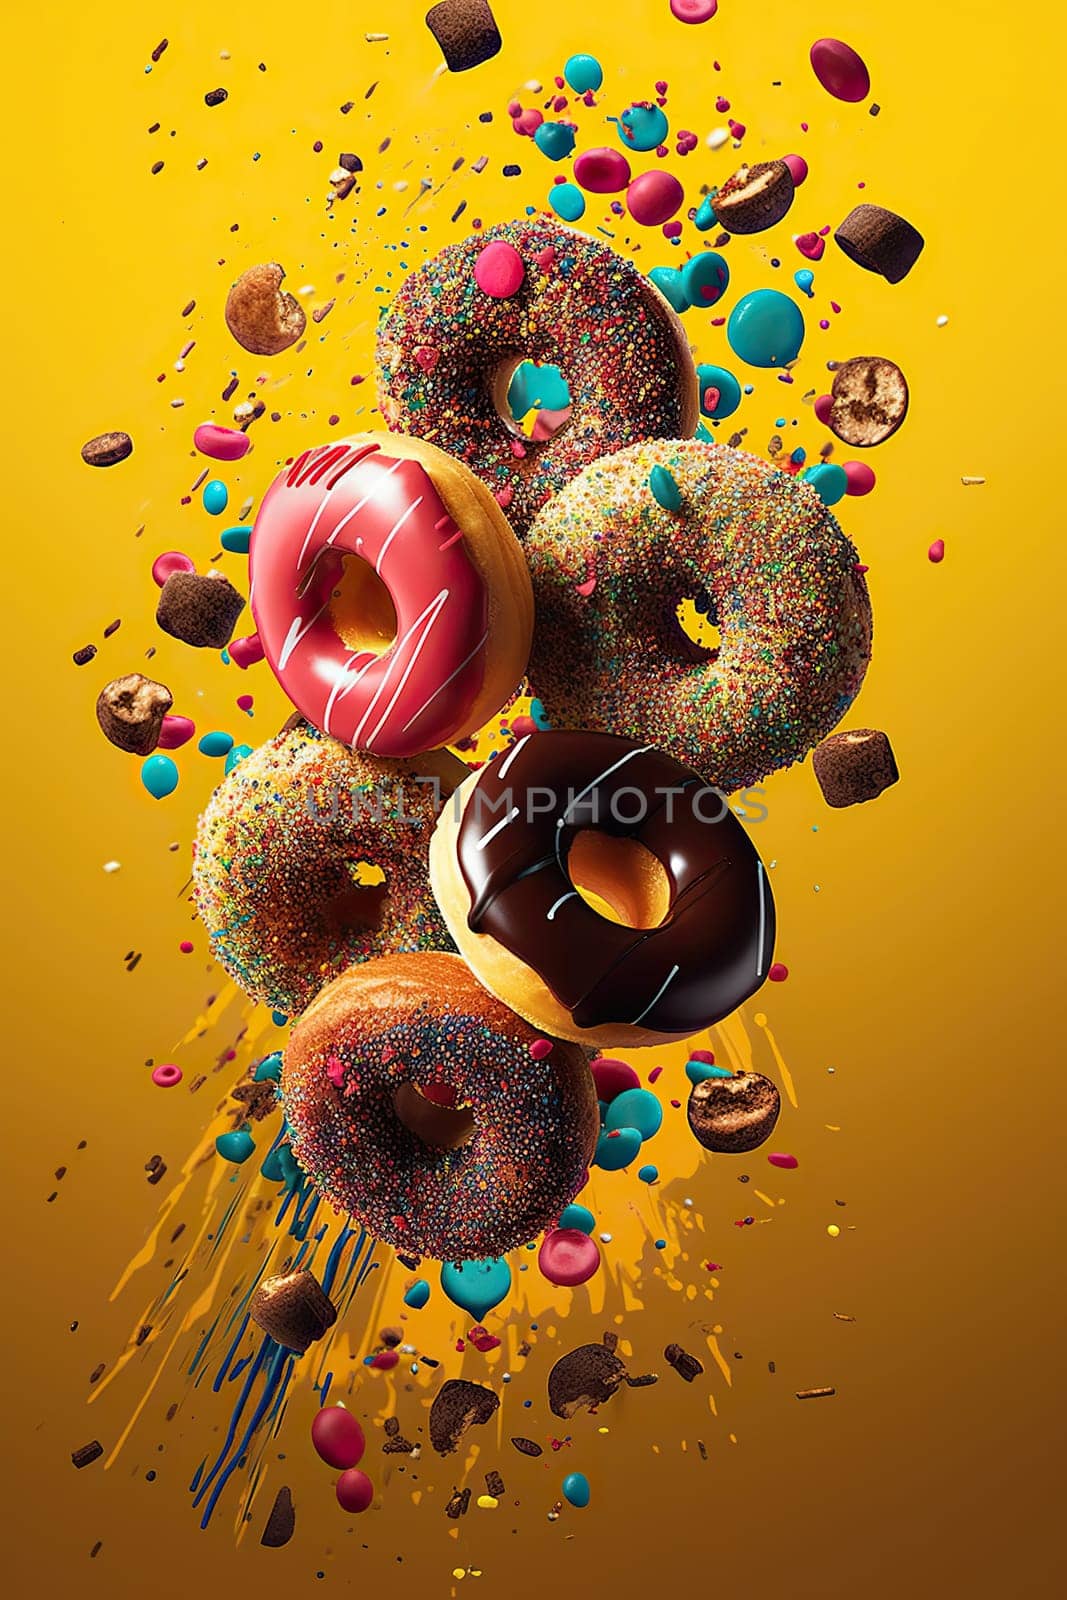 Flying Fresh Sweet Donuts With Colorful Topping by tan4ikk1